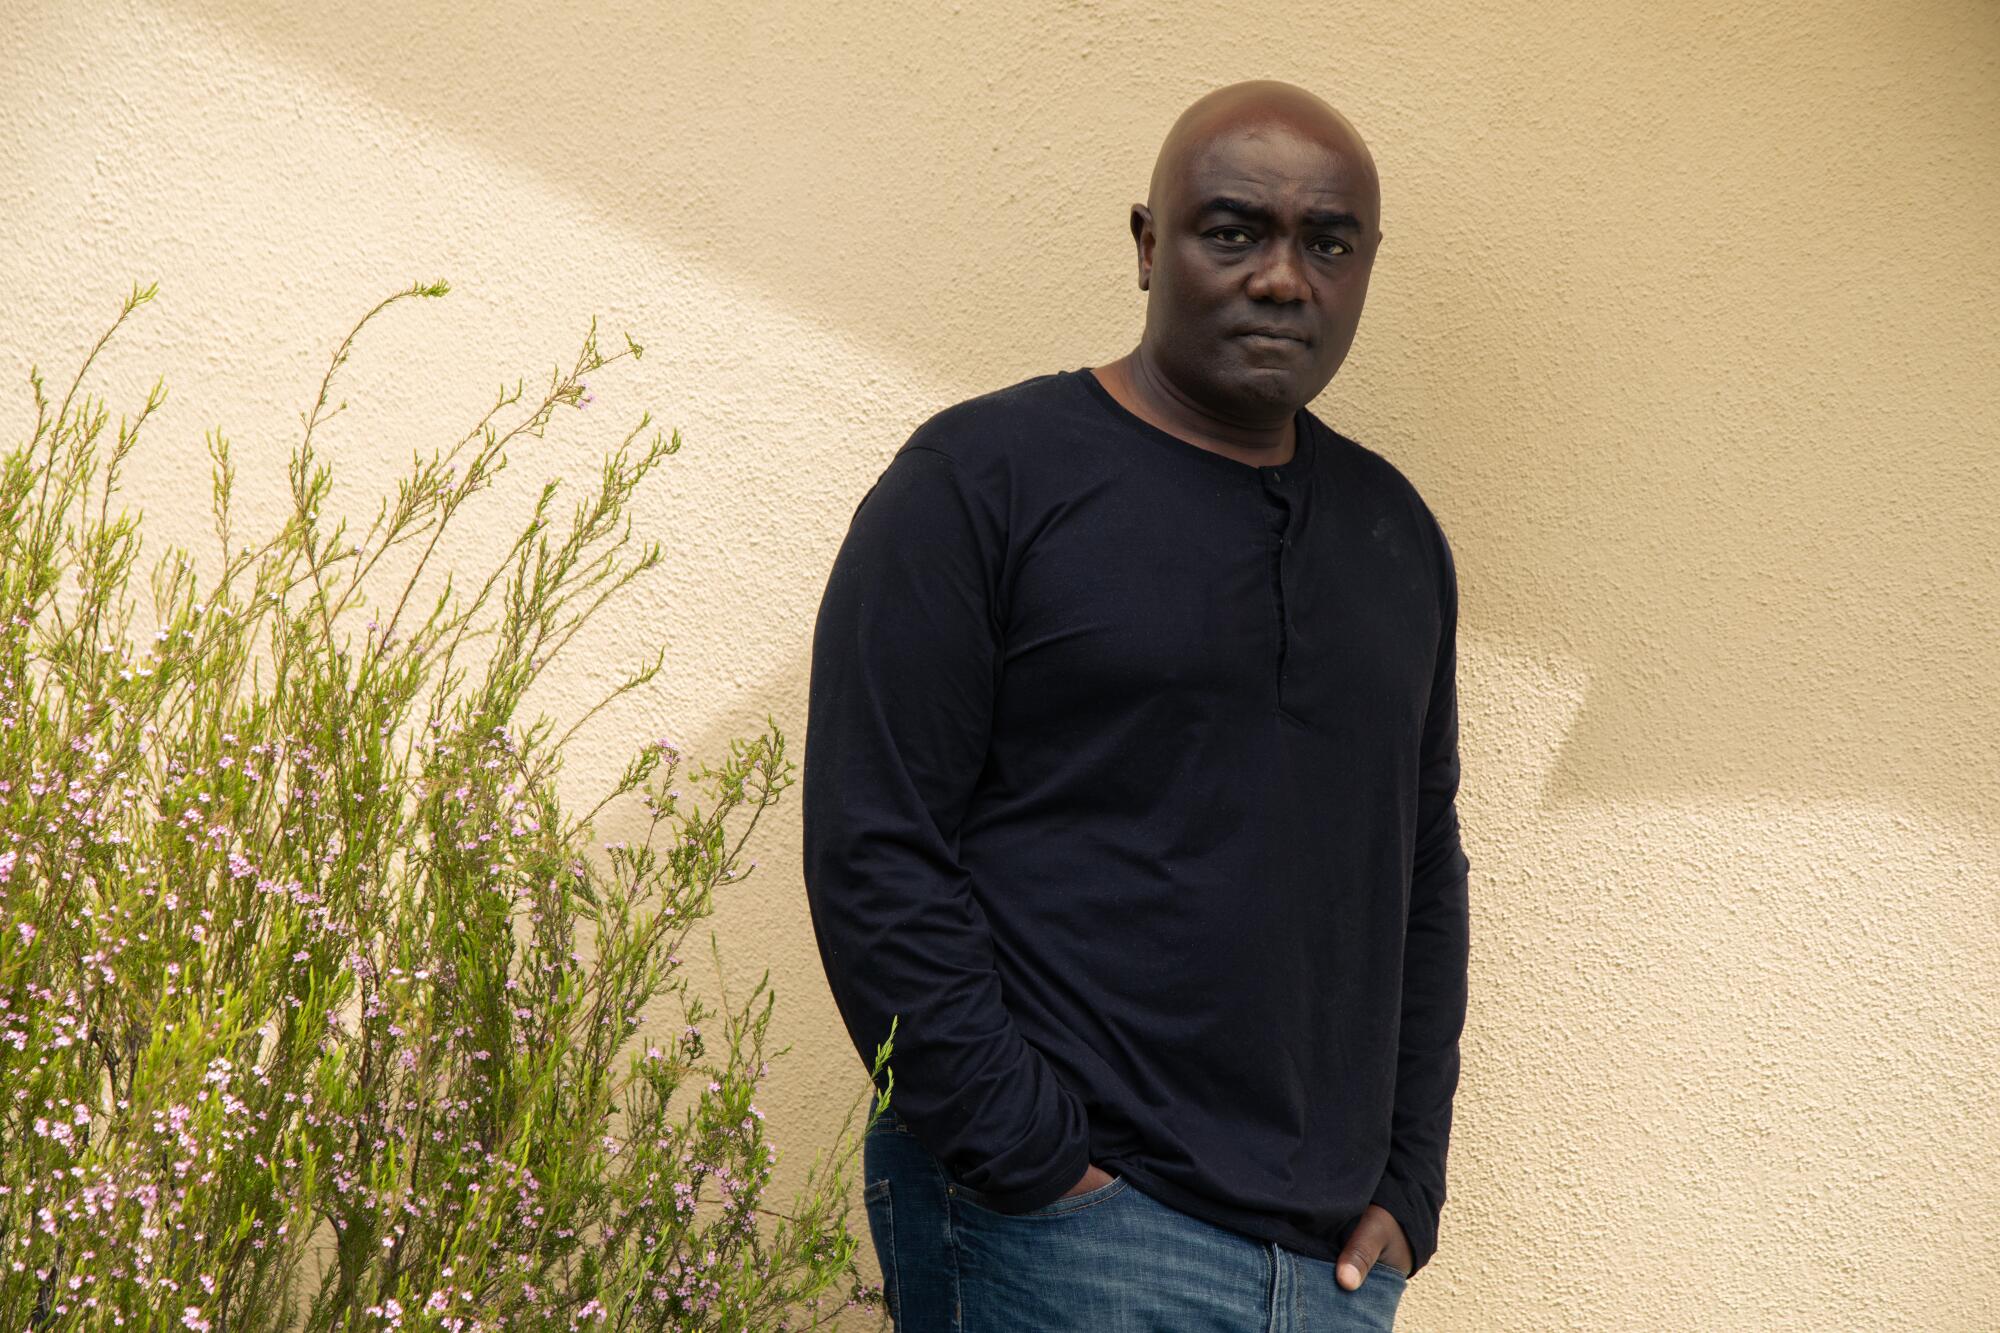 A man in a black sweatshirt and jeans stands against a yellow wall next to a flowering shrub.